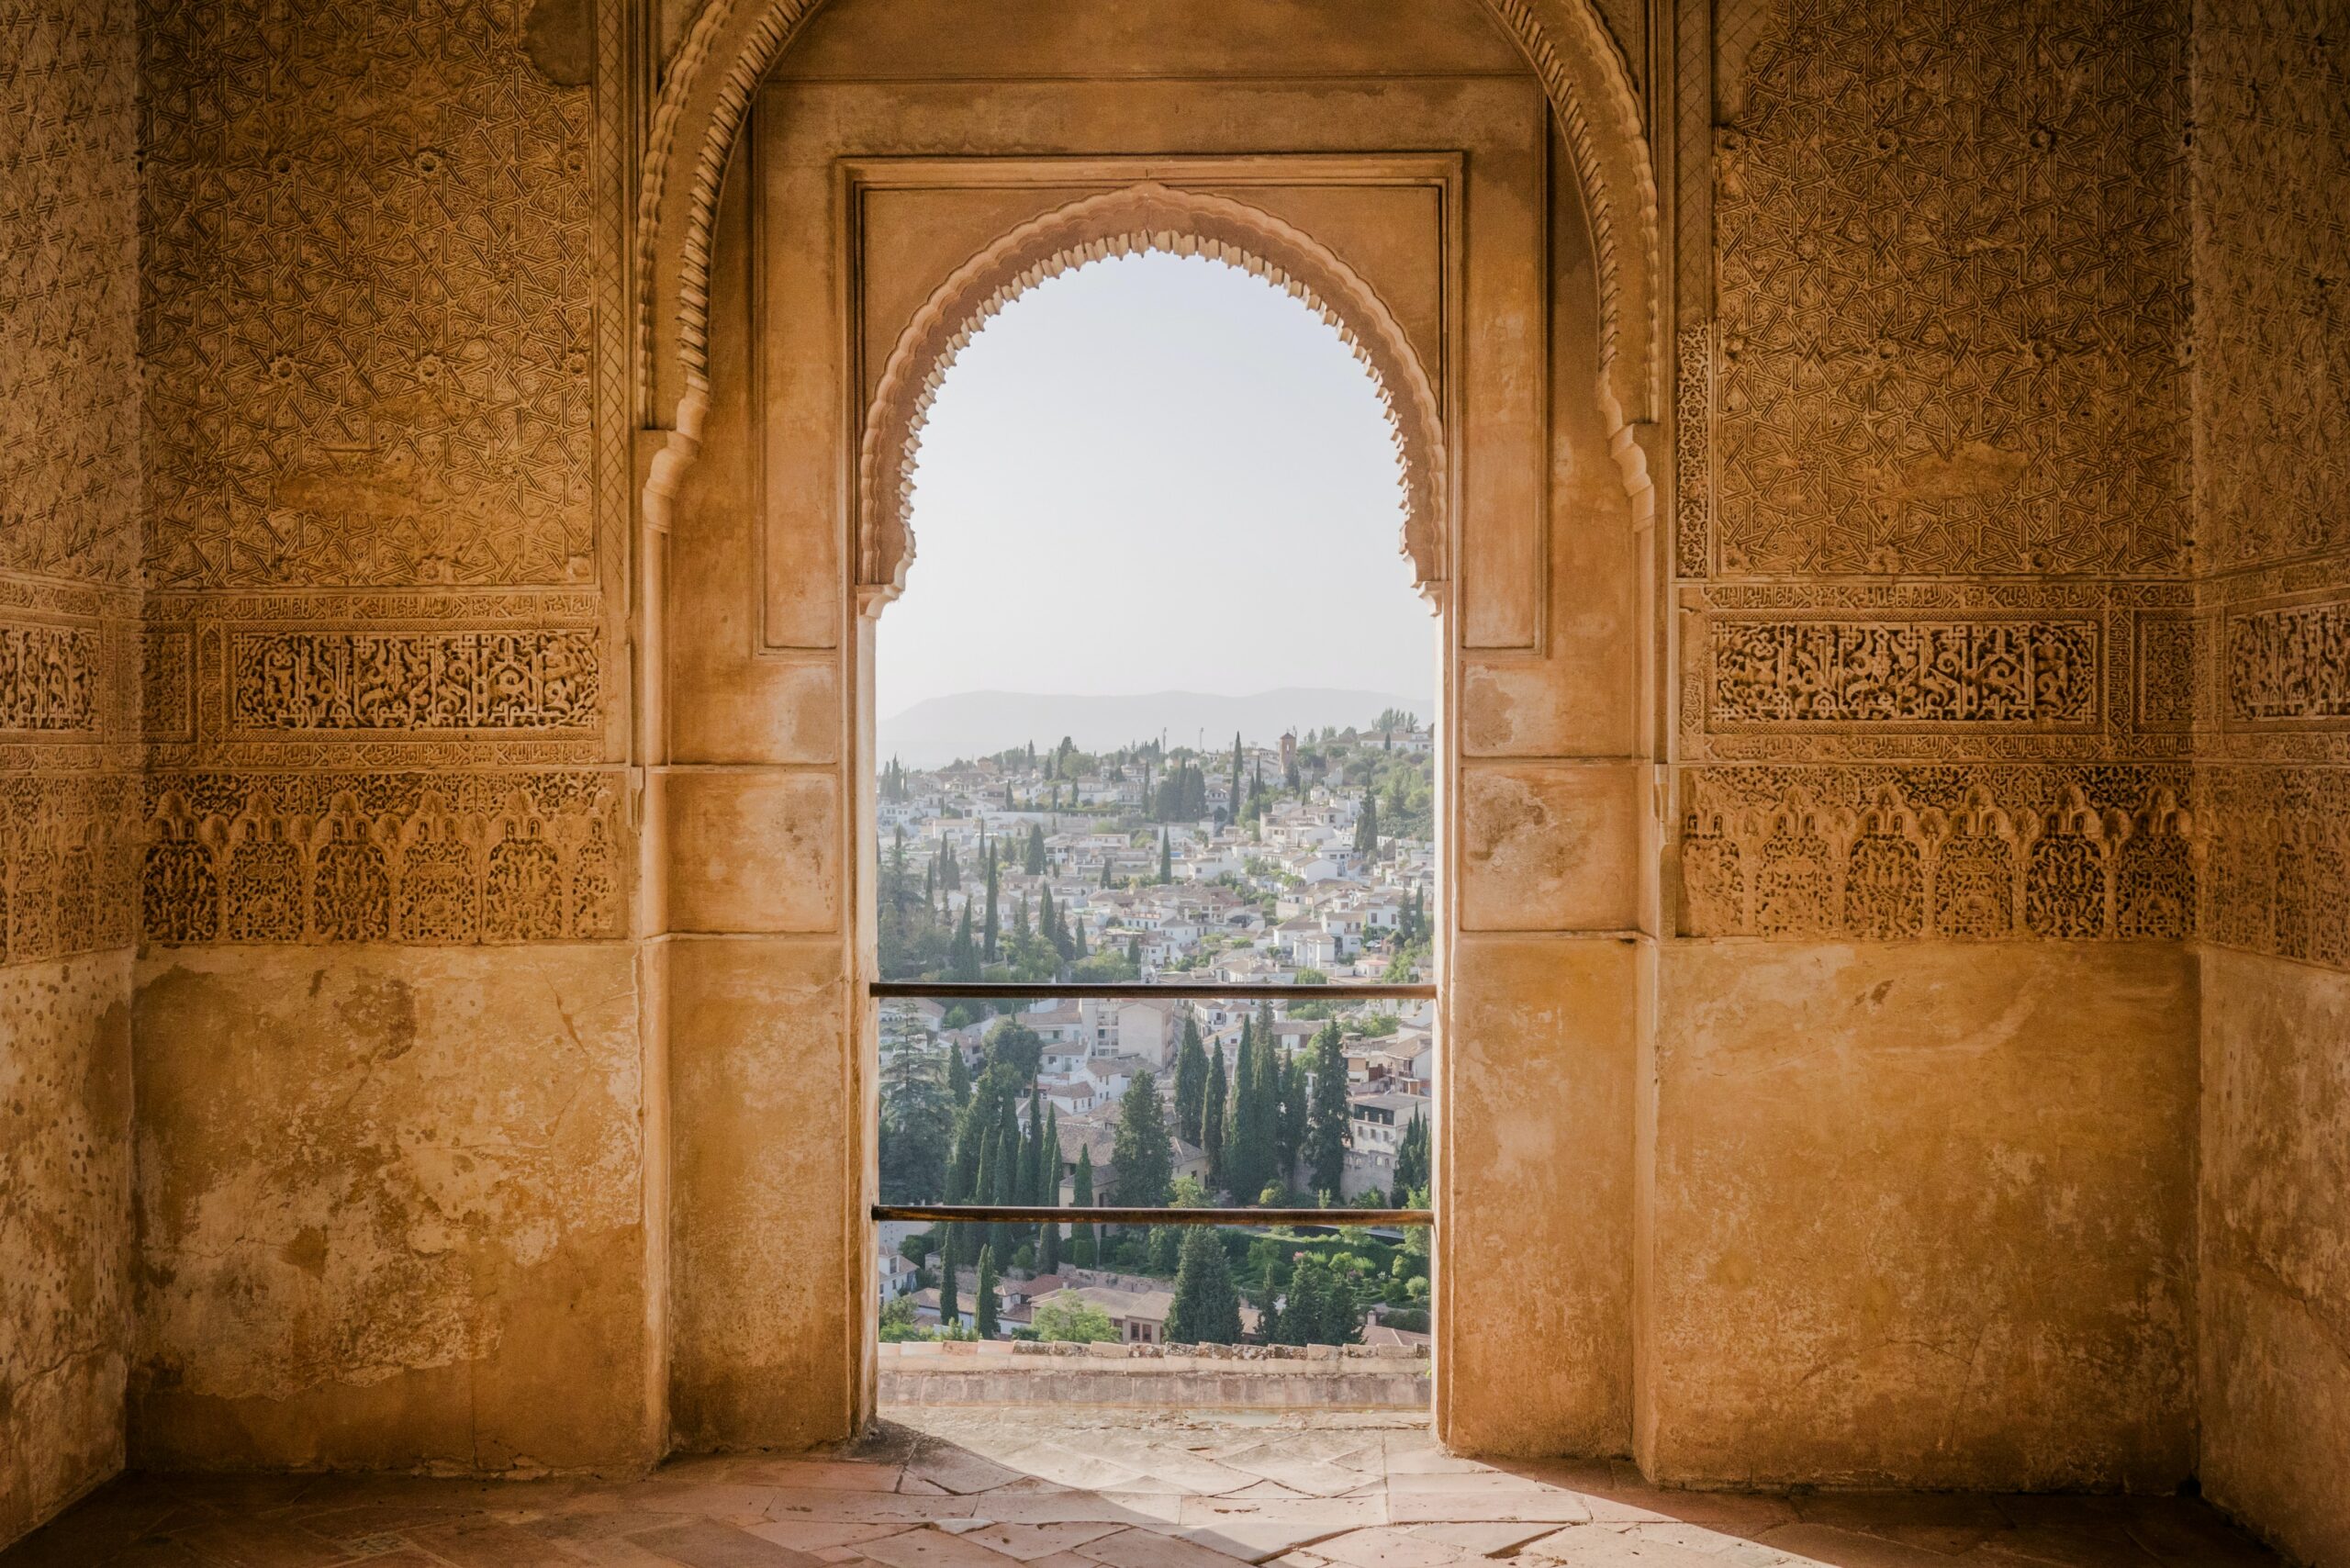 One of the arched doorways looking out into the horizon in La Alhambra